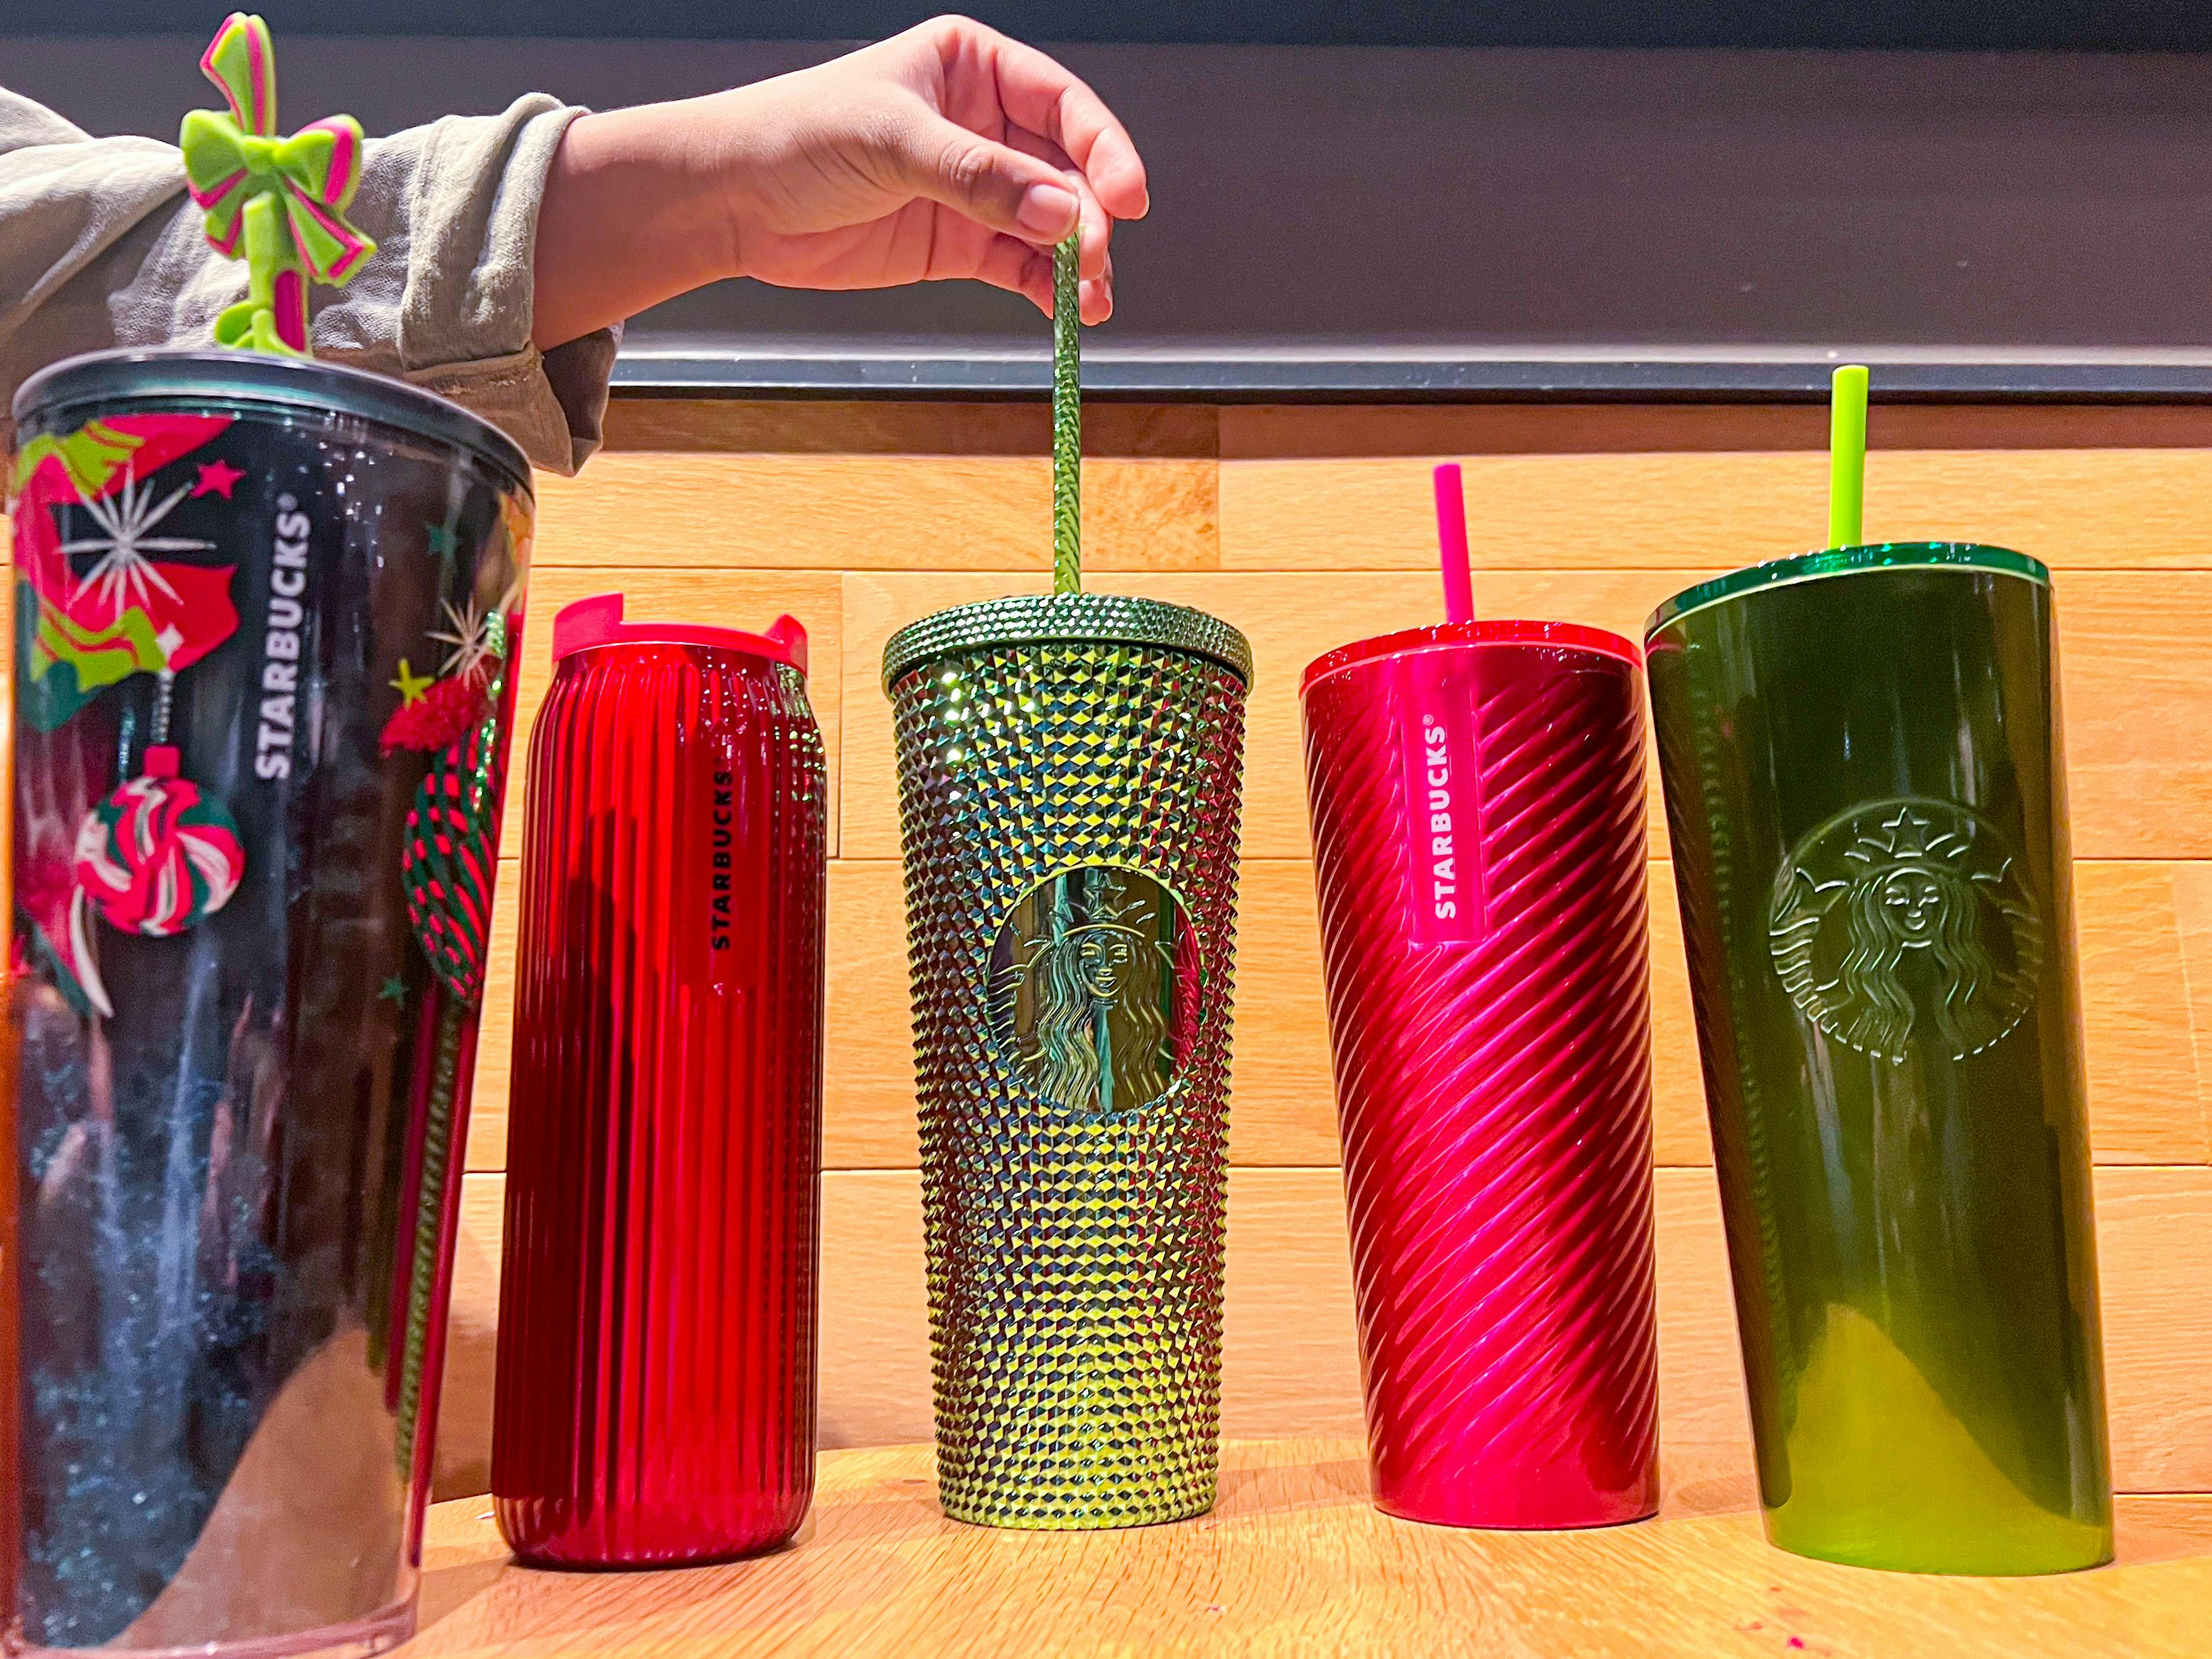 Starbucks' new holiday cups are DIY-style